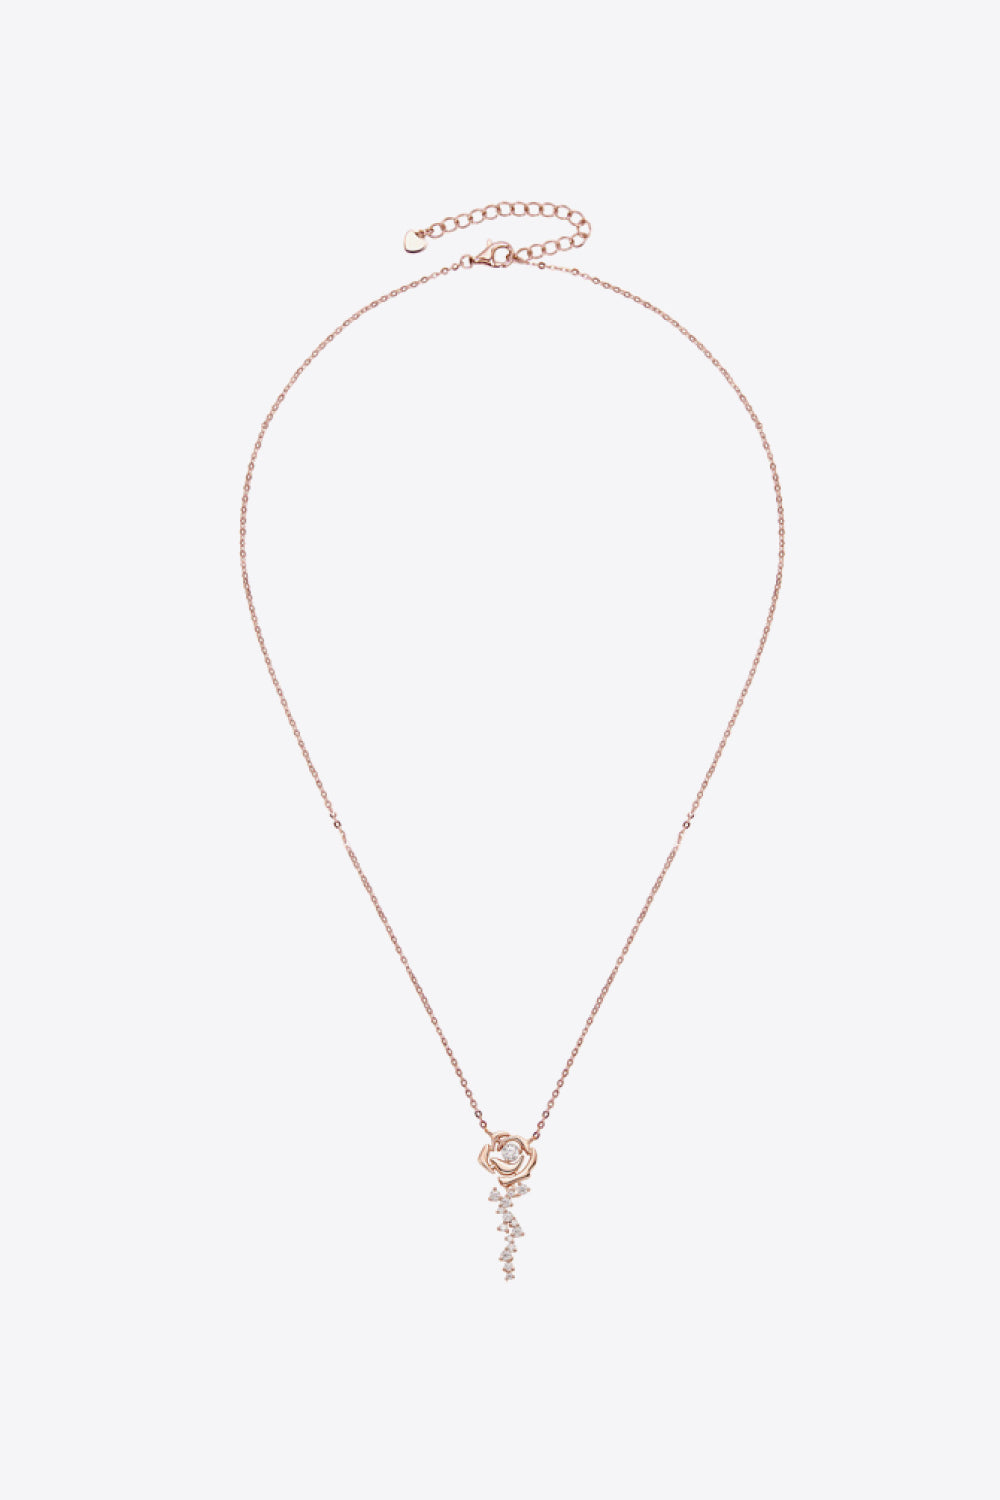 The Rose Gold Necklace